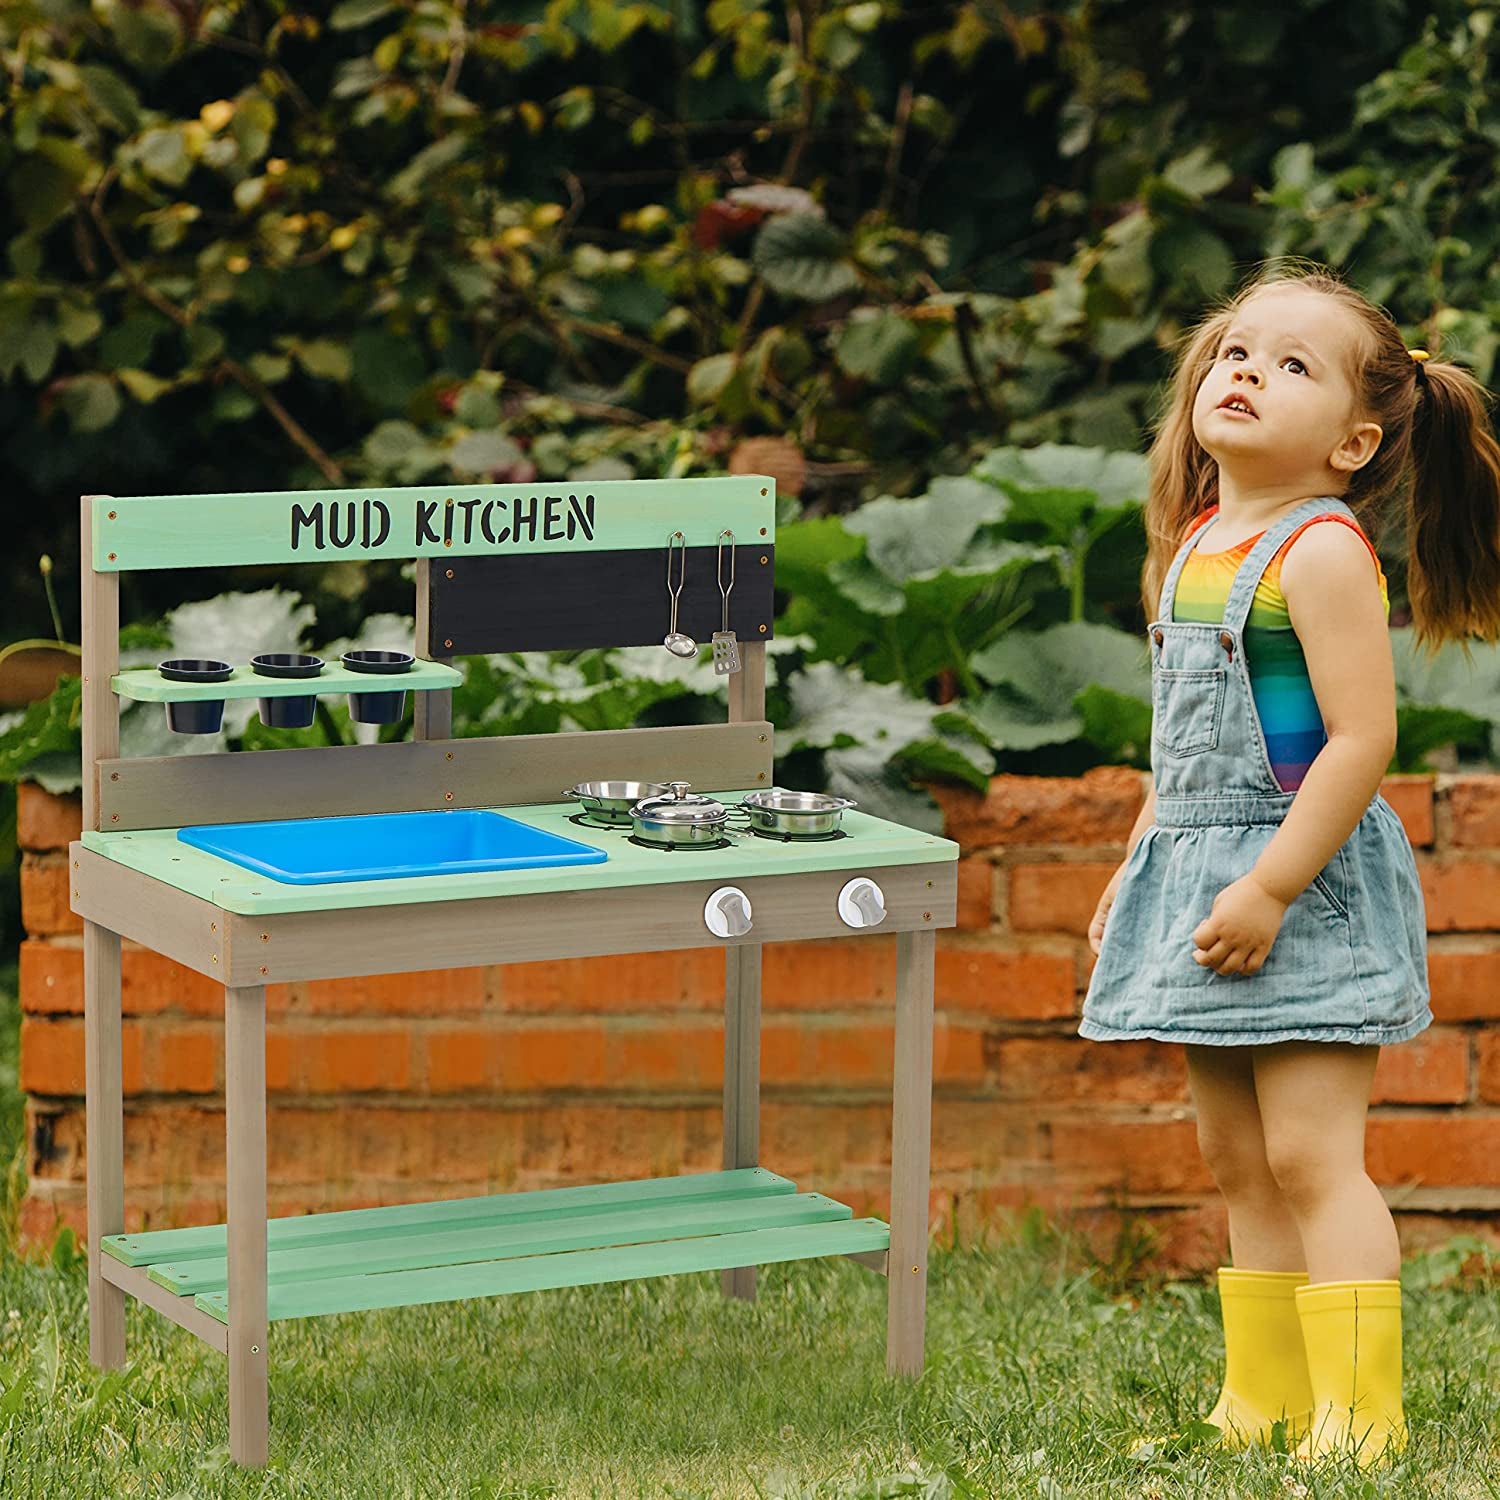 child standing outside beside mud kitchen with stove and faux slop sink